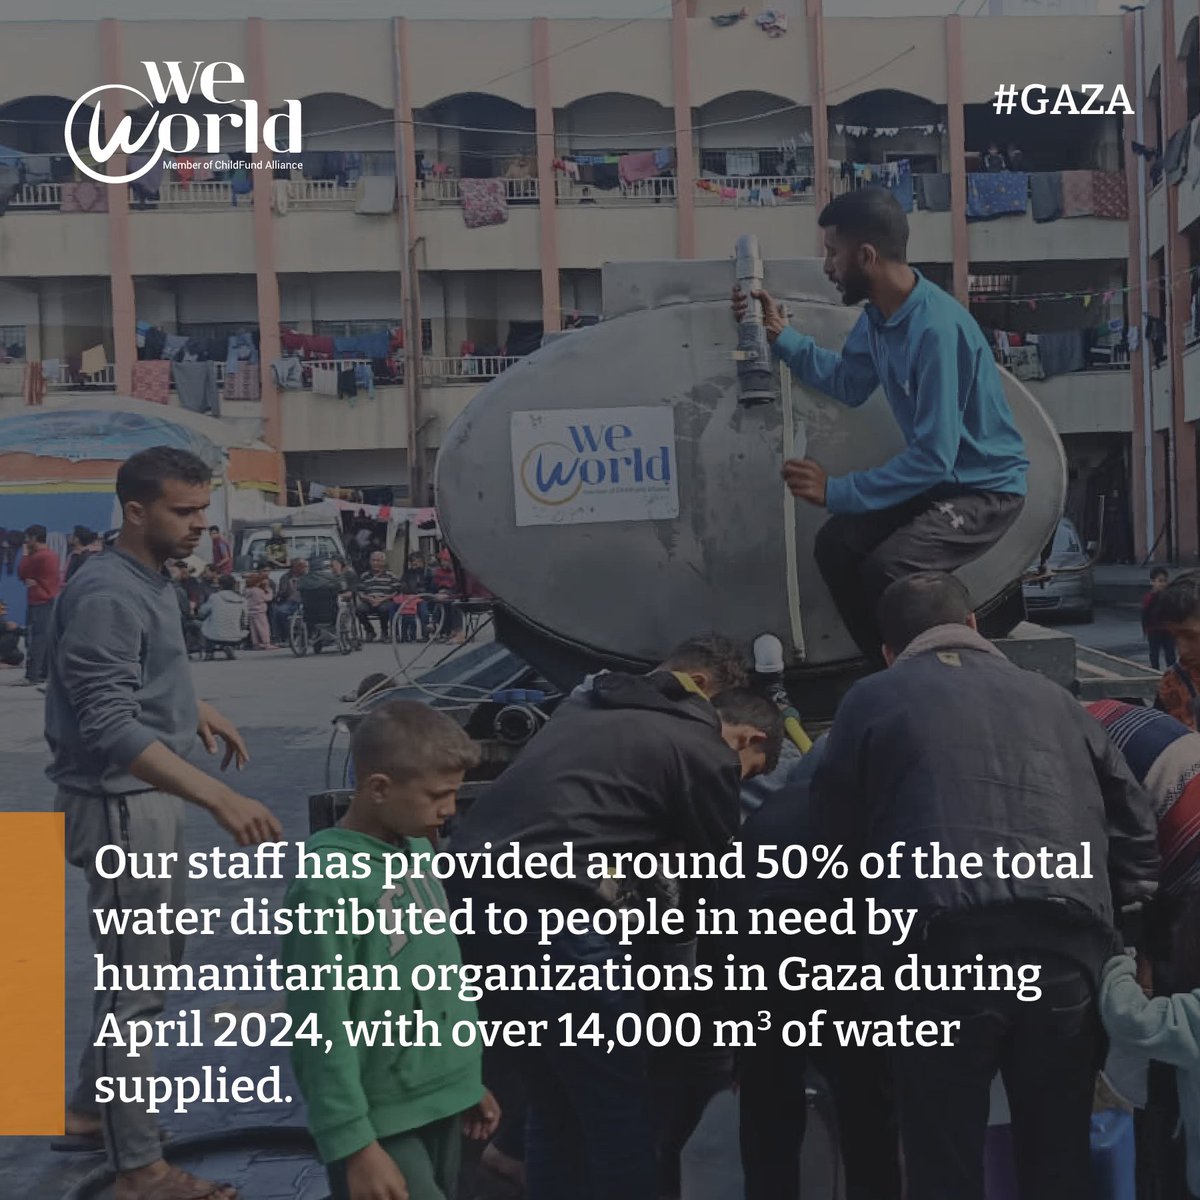 Over the past 6 months in #Gaza, we have assisted more than 400,000 people, including children, with prompt relief efforts. We have delivered life-saving help, prioritizing displaced communities, ensuring access to safe water and sanitation, and upholding their dignity.